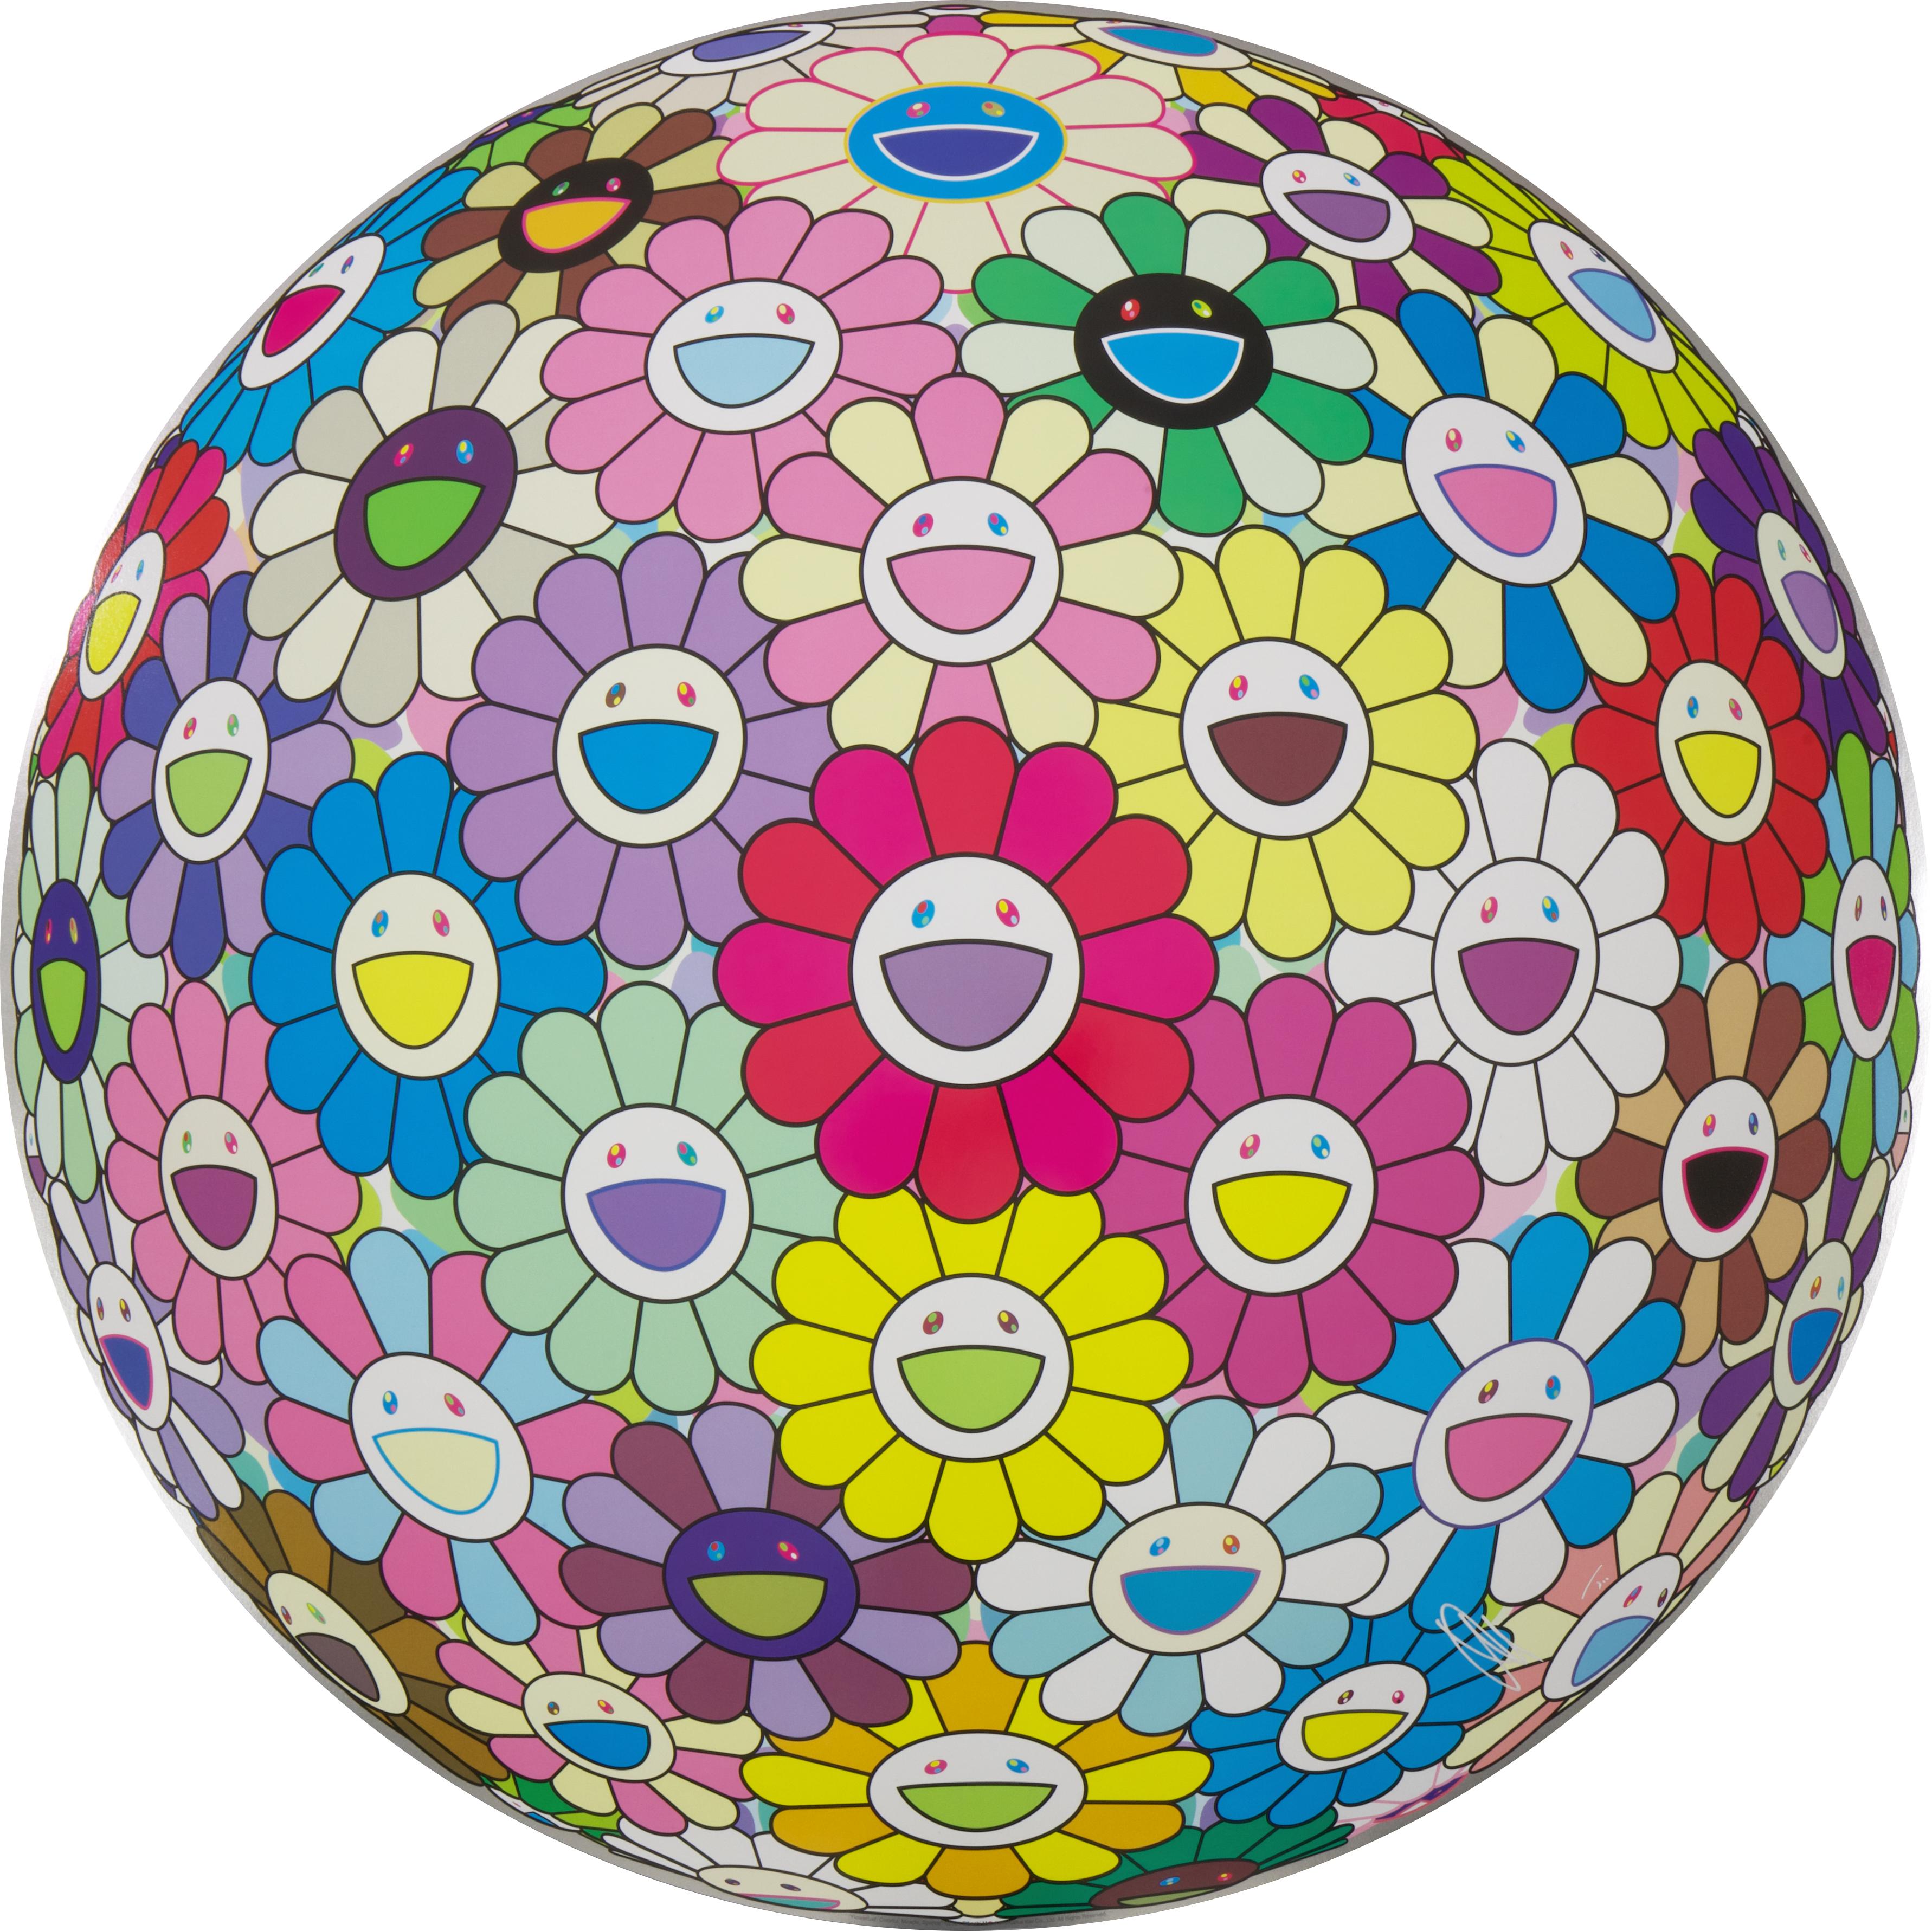 Artist: Takashi Murakami
Title: Flowerball: Colorful, Miracle, Sparkles
Year: 2022
Edition: 300
Size: 710mm / 27.45